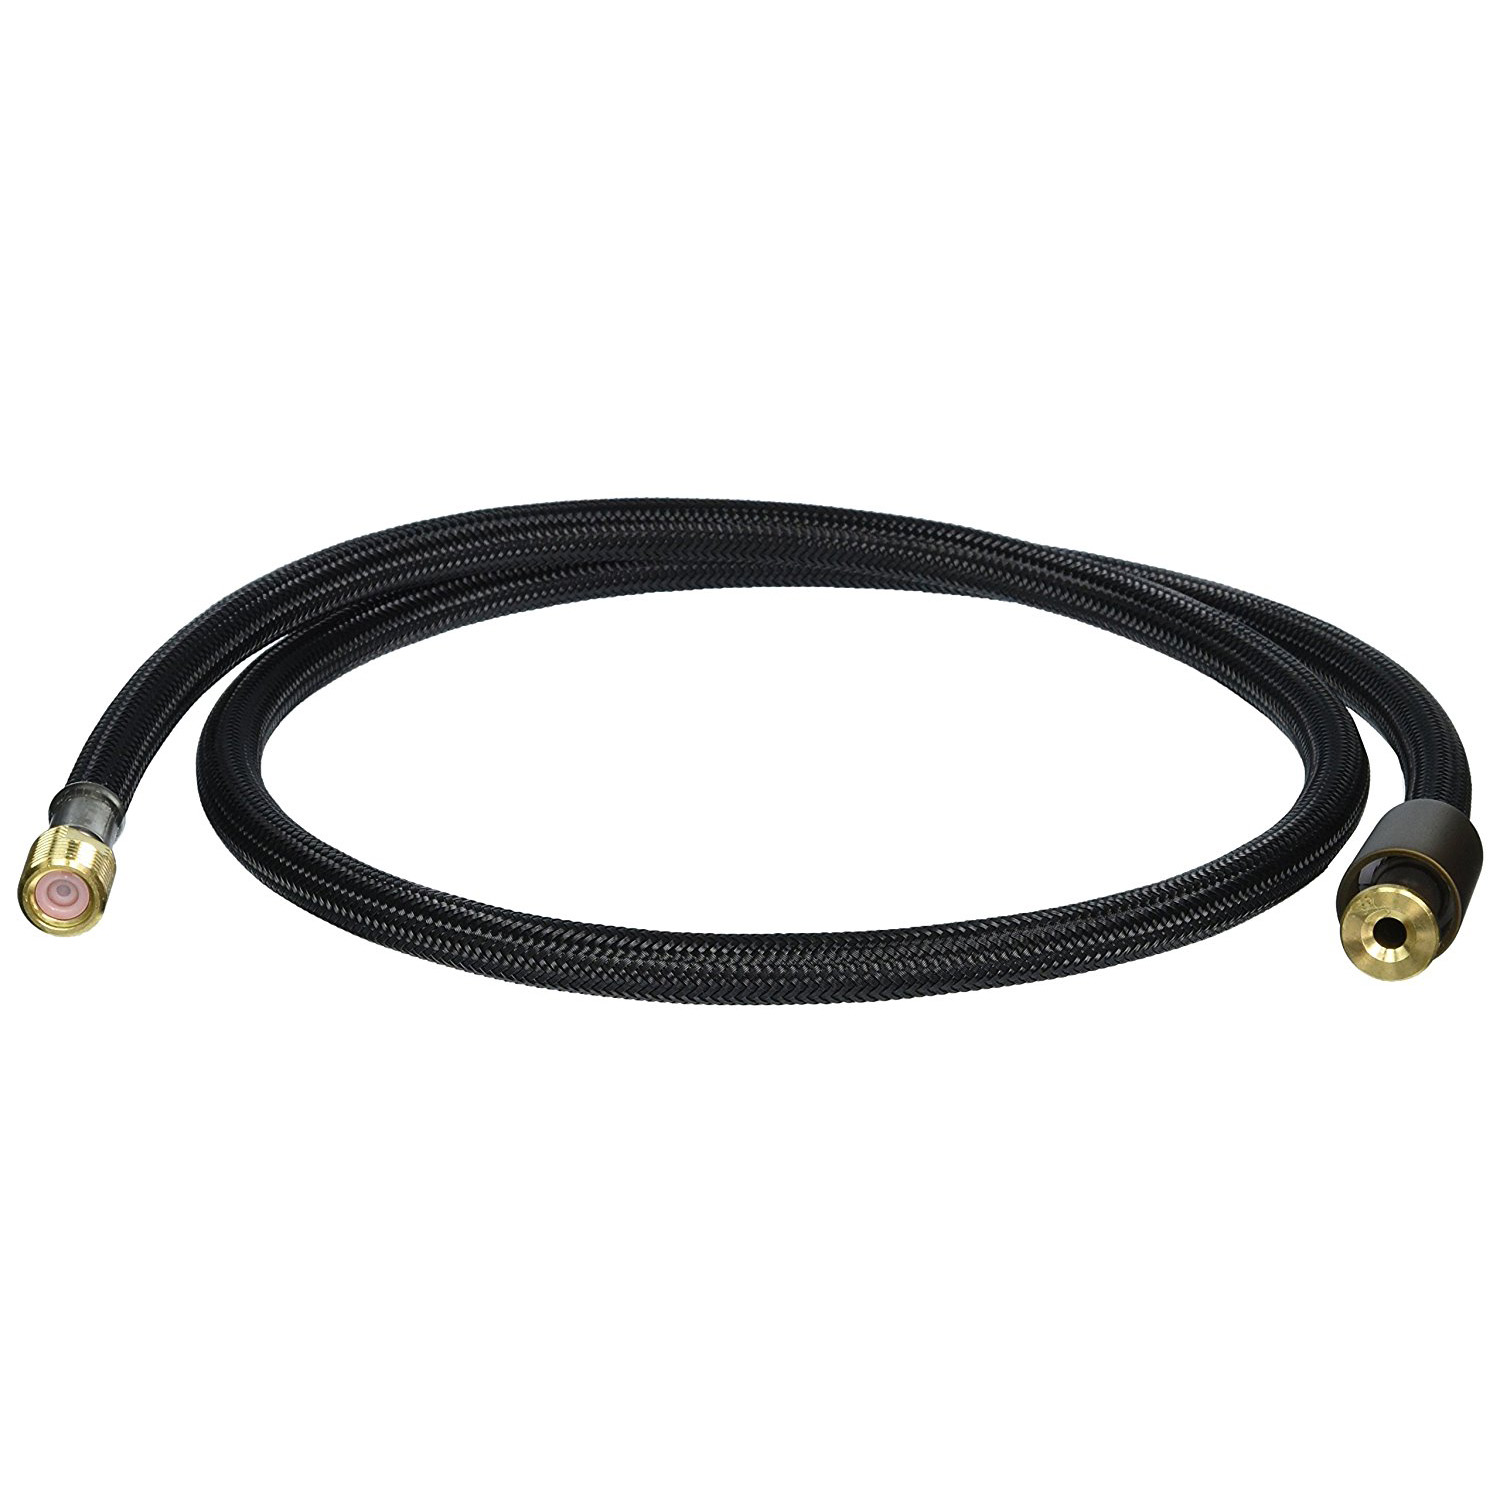 Perrin & Rowe 47" Rinse Hose Black Nylon for Sidespray Kitchen Faucets English Bronze